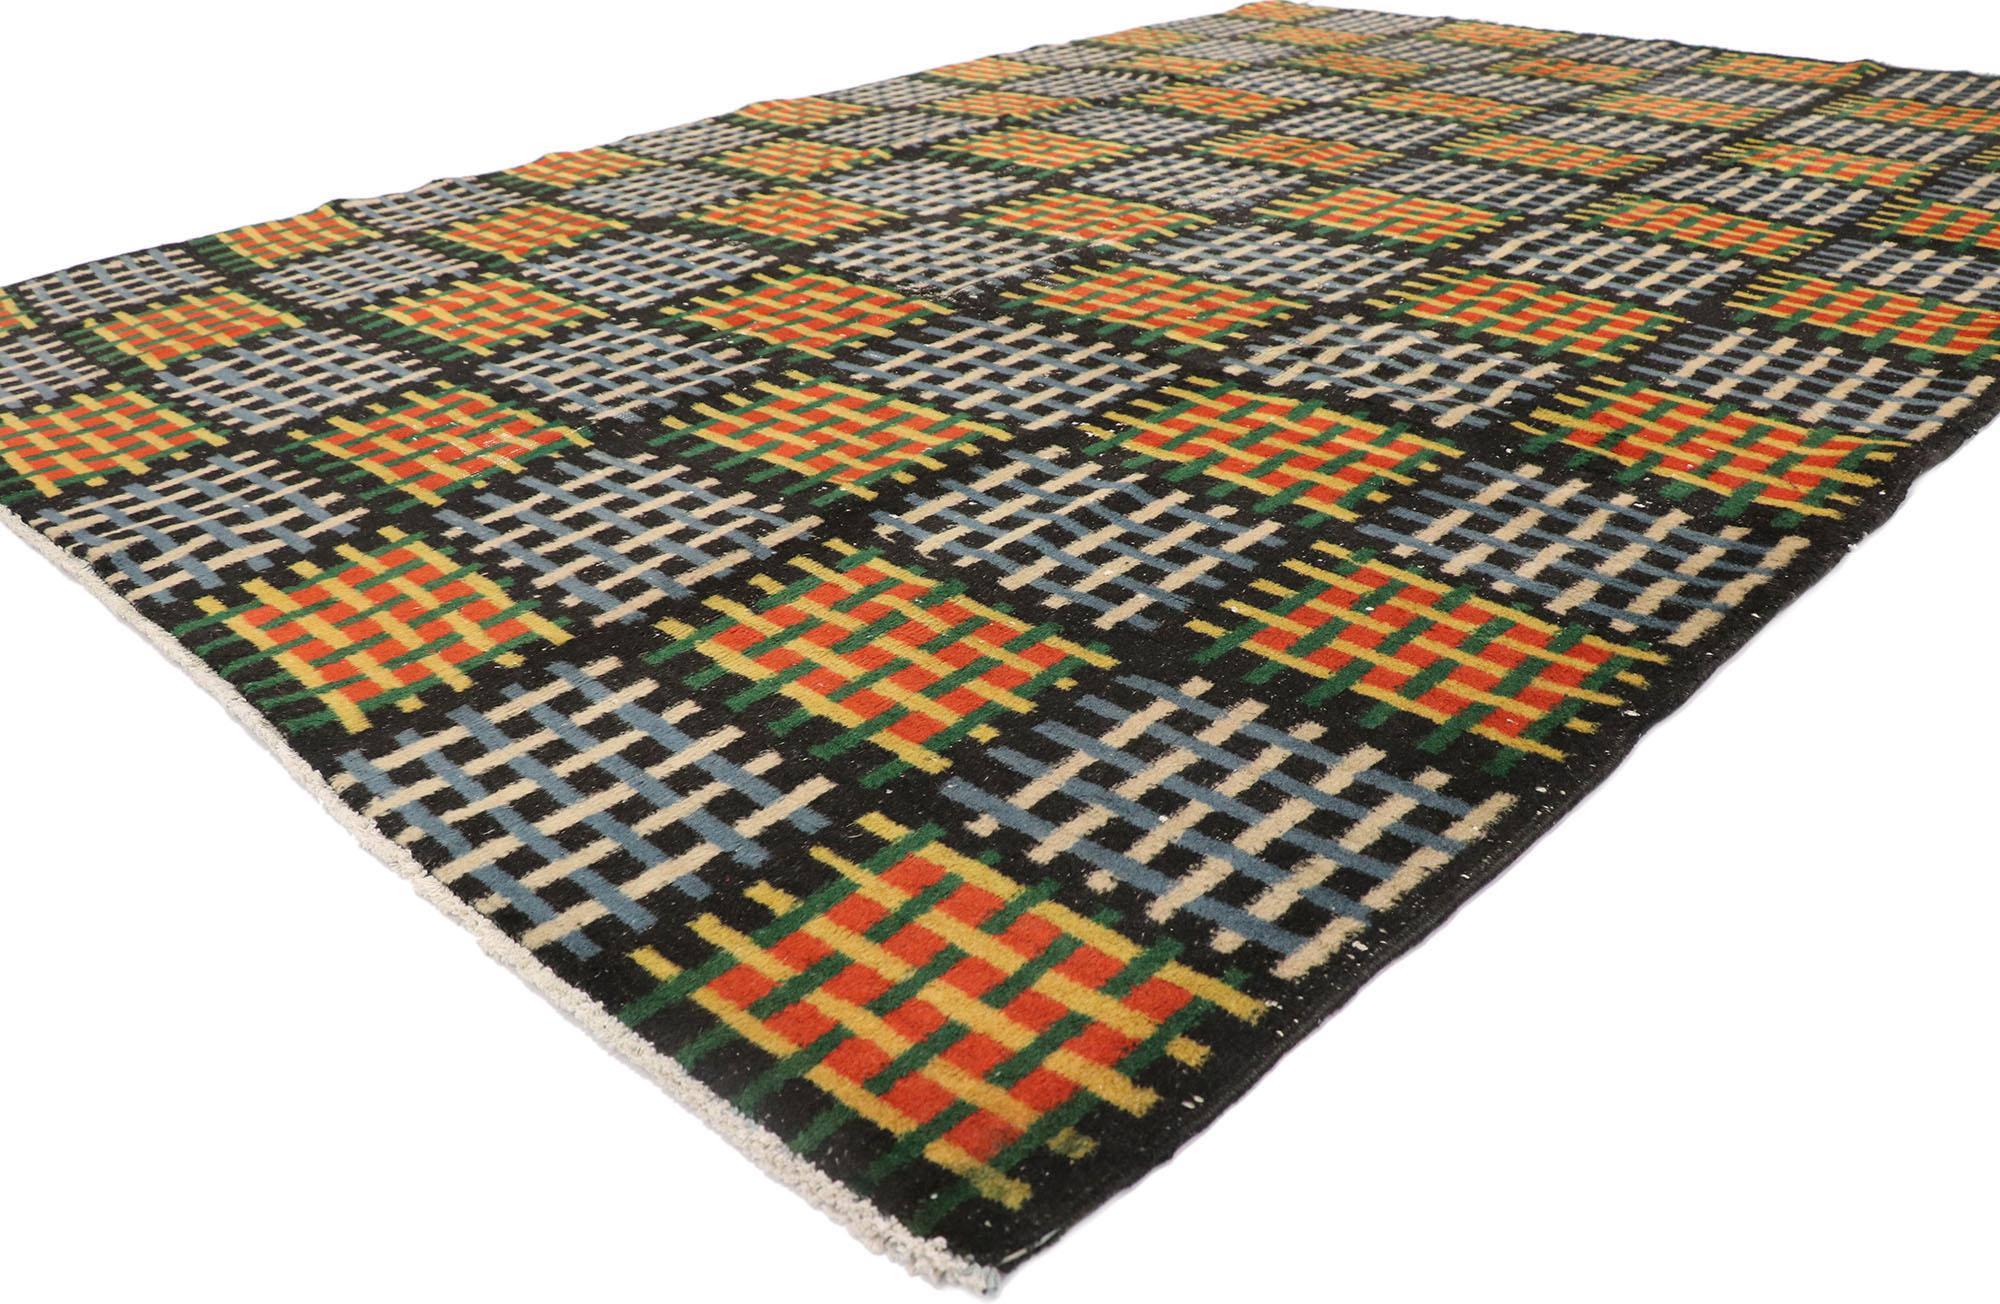 53665 Zeki Muren Vintage Turkish Sivas Rug Inspired by Gunta Stölzl 07'00 x 09'10. Showcasing a bold expressive design, incredible detail and texture, this hand knotted wool Zeki Muren vintage Turkish Sivas rug is a captivating vision of woven